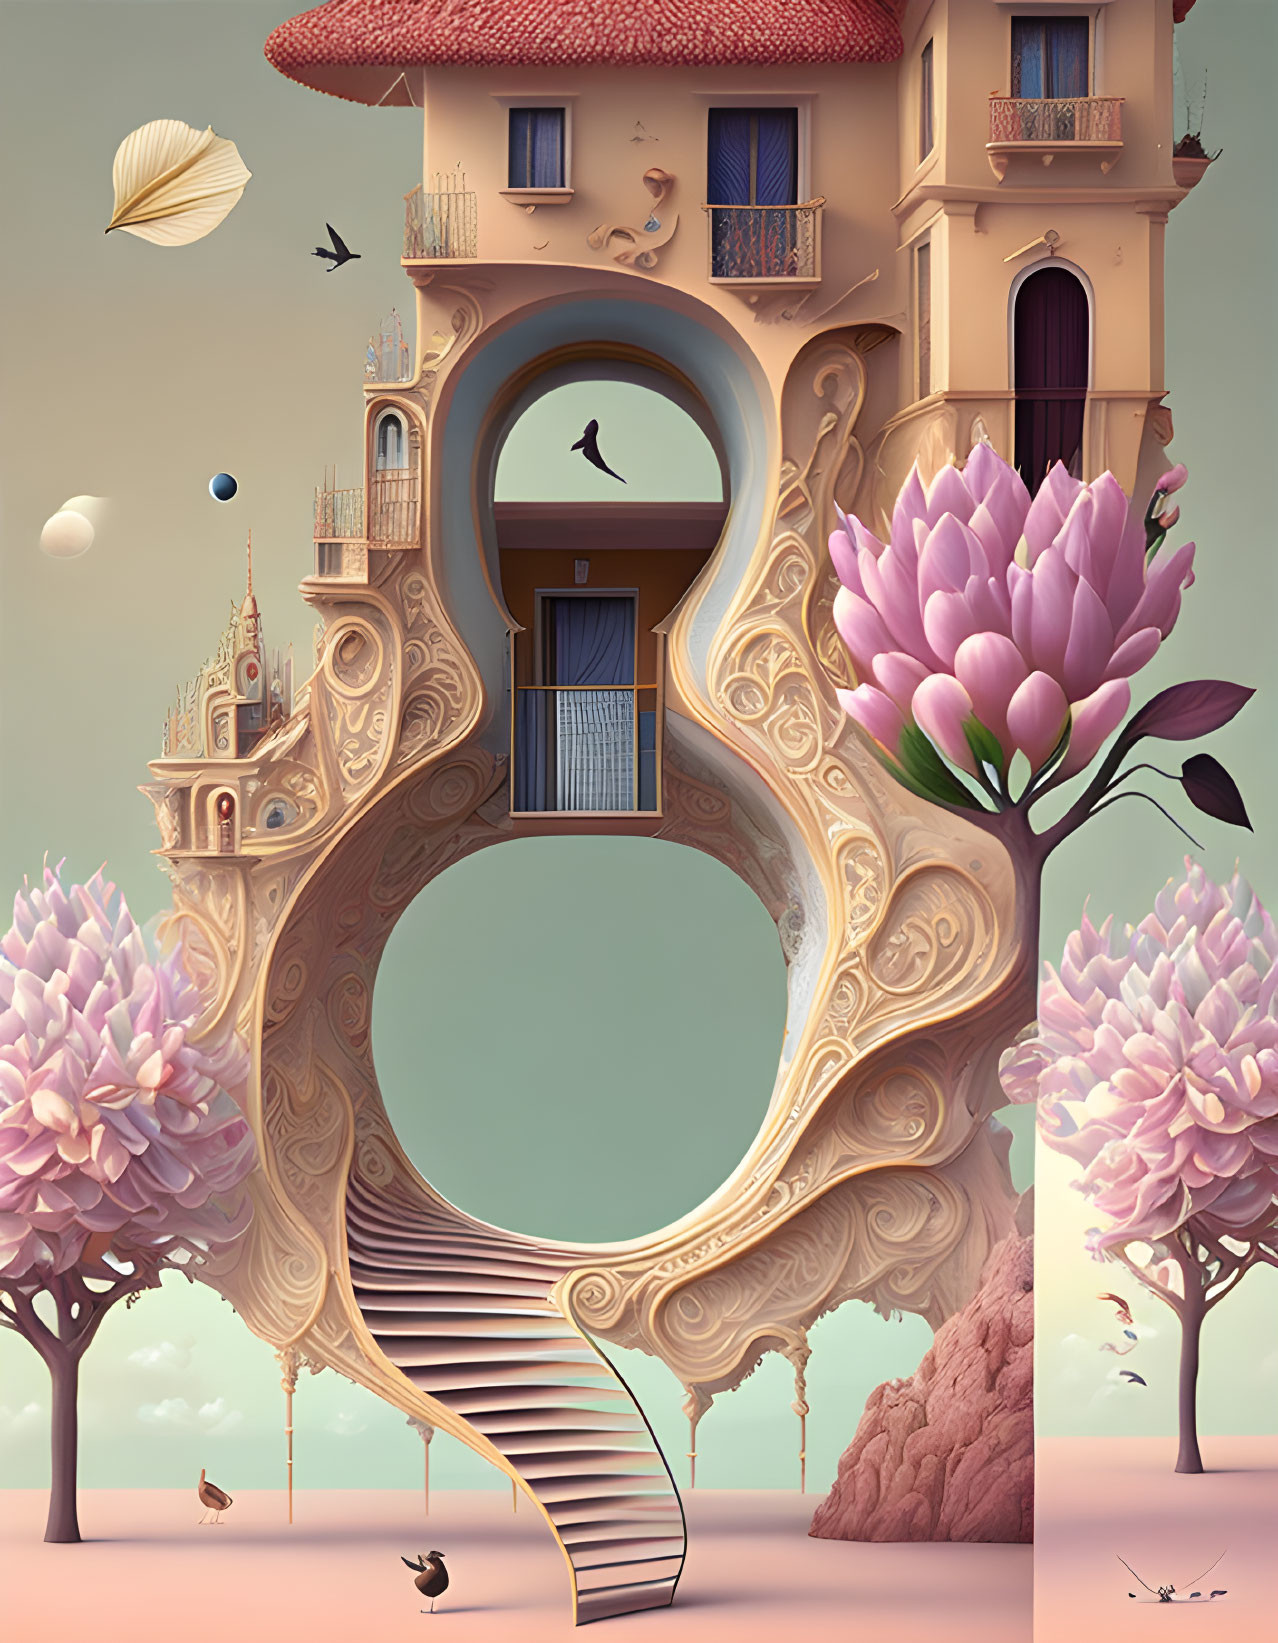 Illustration of ornate house surrounded by blooming trees and floating objects